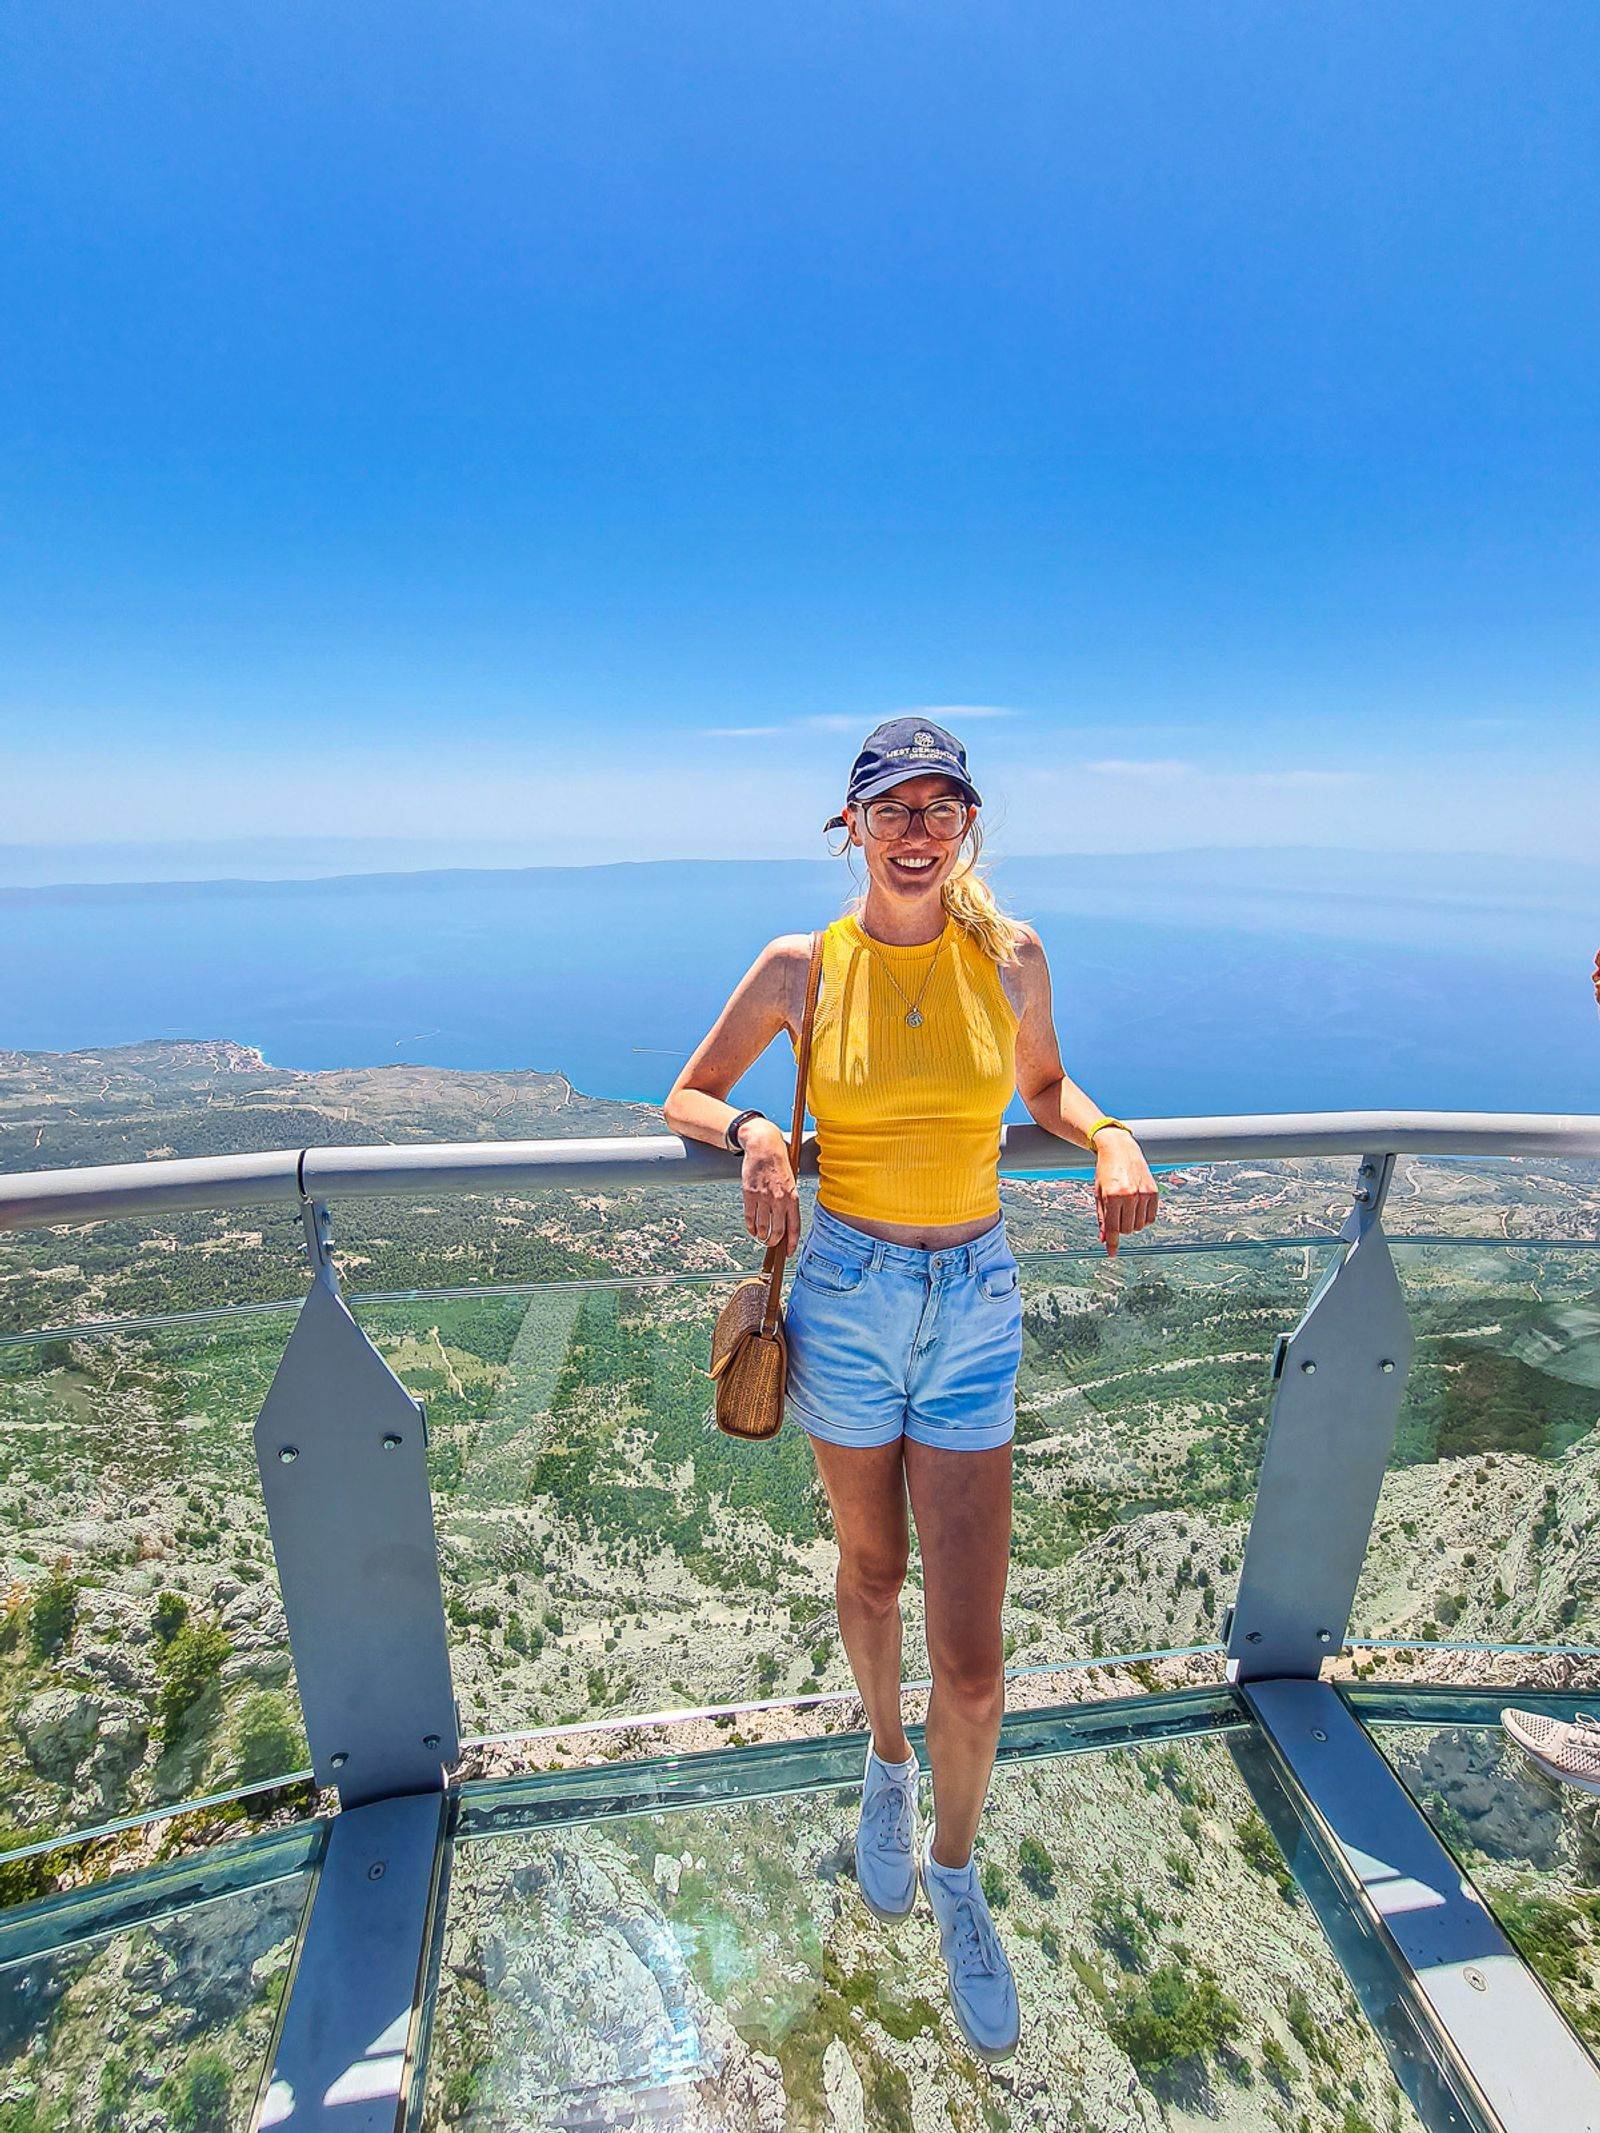 girl in orange top and denim shorts standing on a glass bridge above cliff drop and view of the coast in the distance